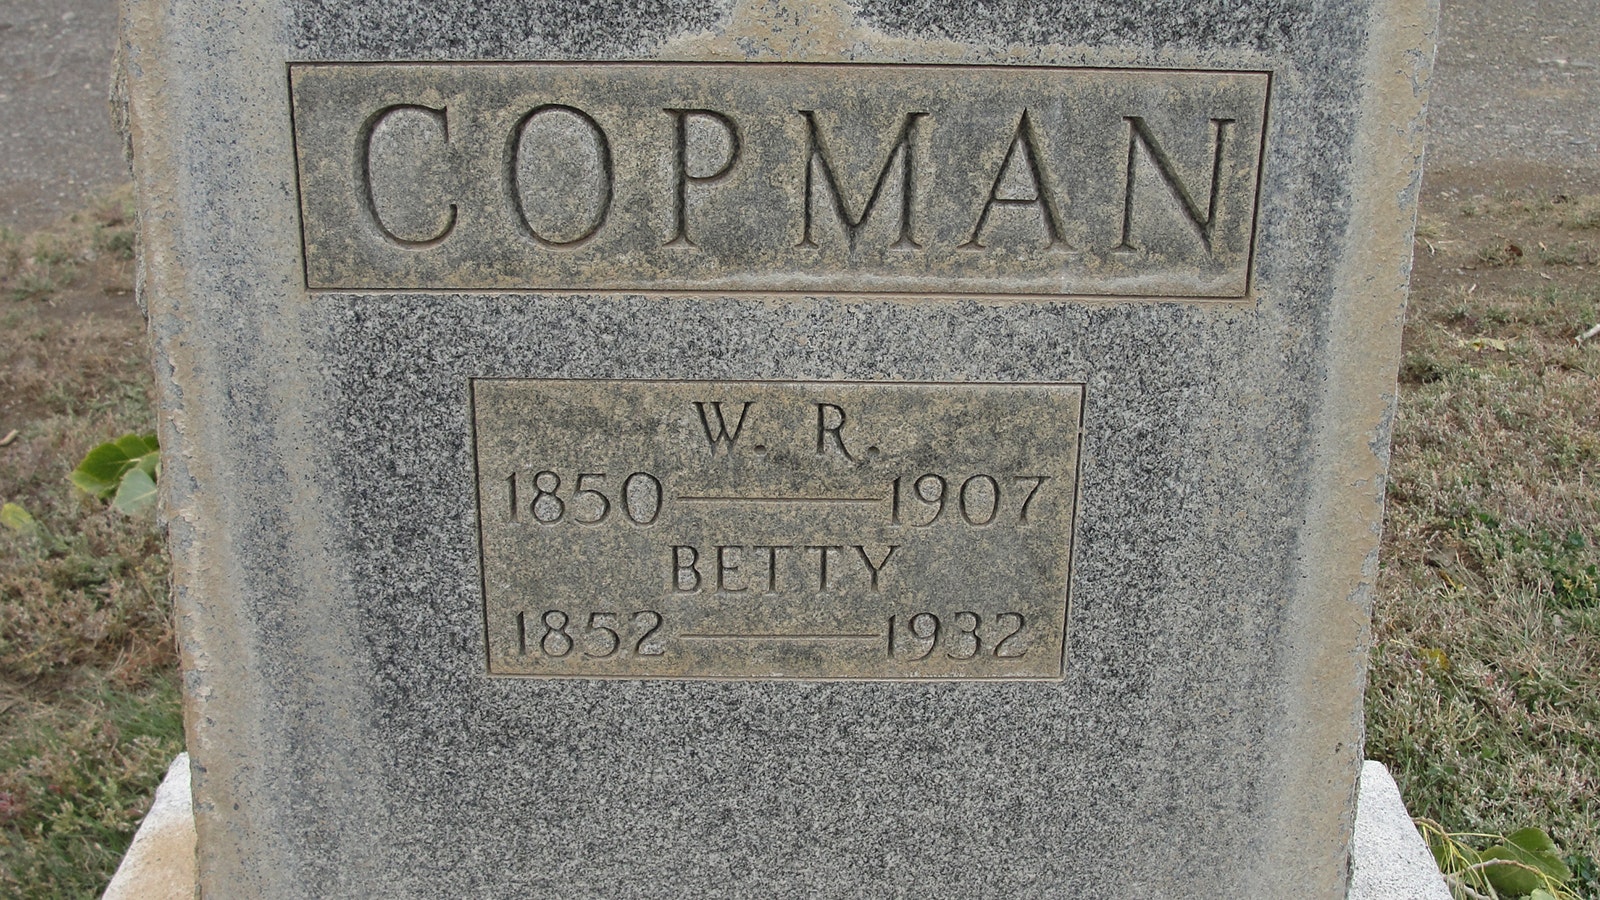 While Wolfgang Robert “Jack” Copman’s hope was to have his ashes scattered off the mountain he planned to launch his flying device from, it never happened. His ashes were buried beside his wife in Greybull, Wyoming.